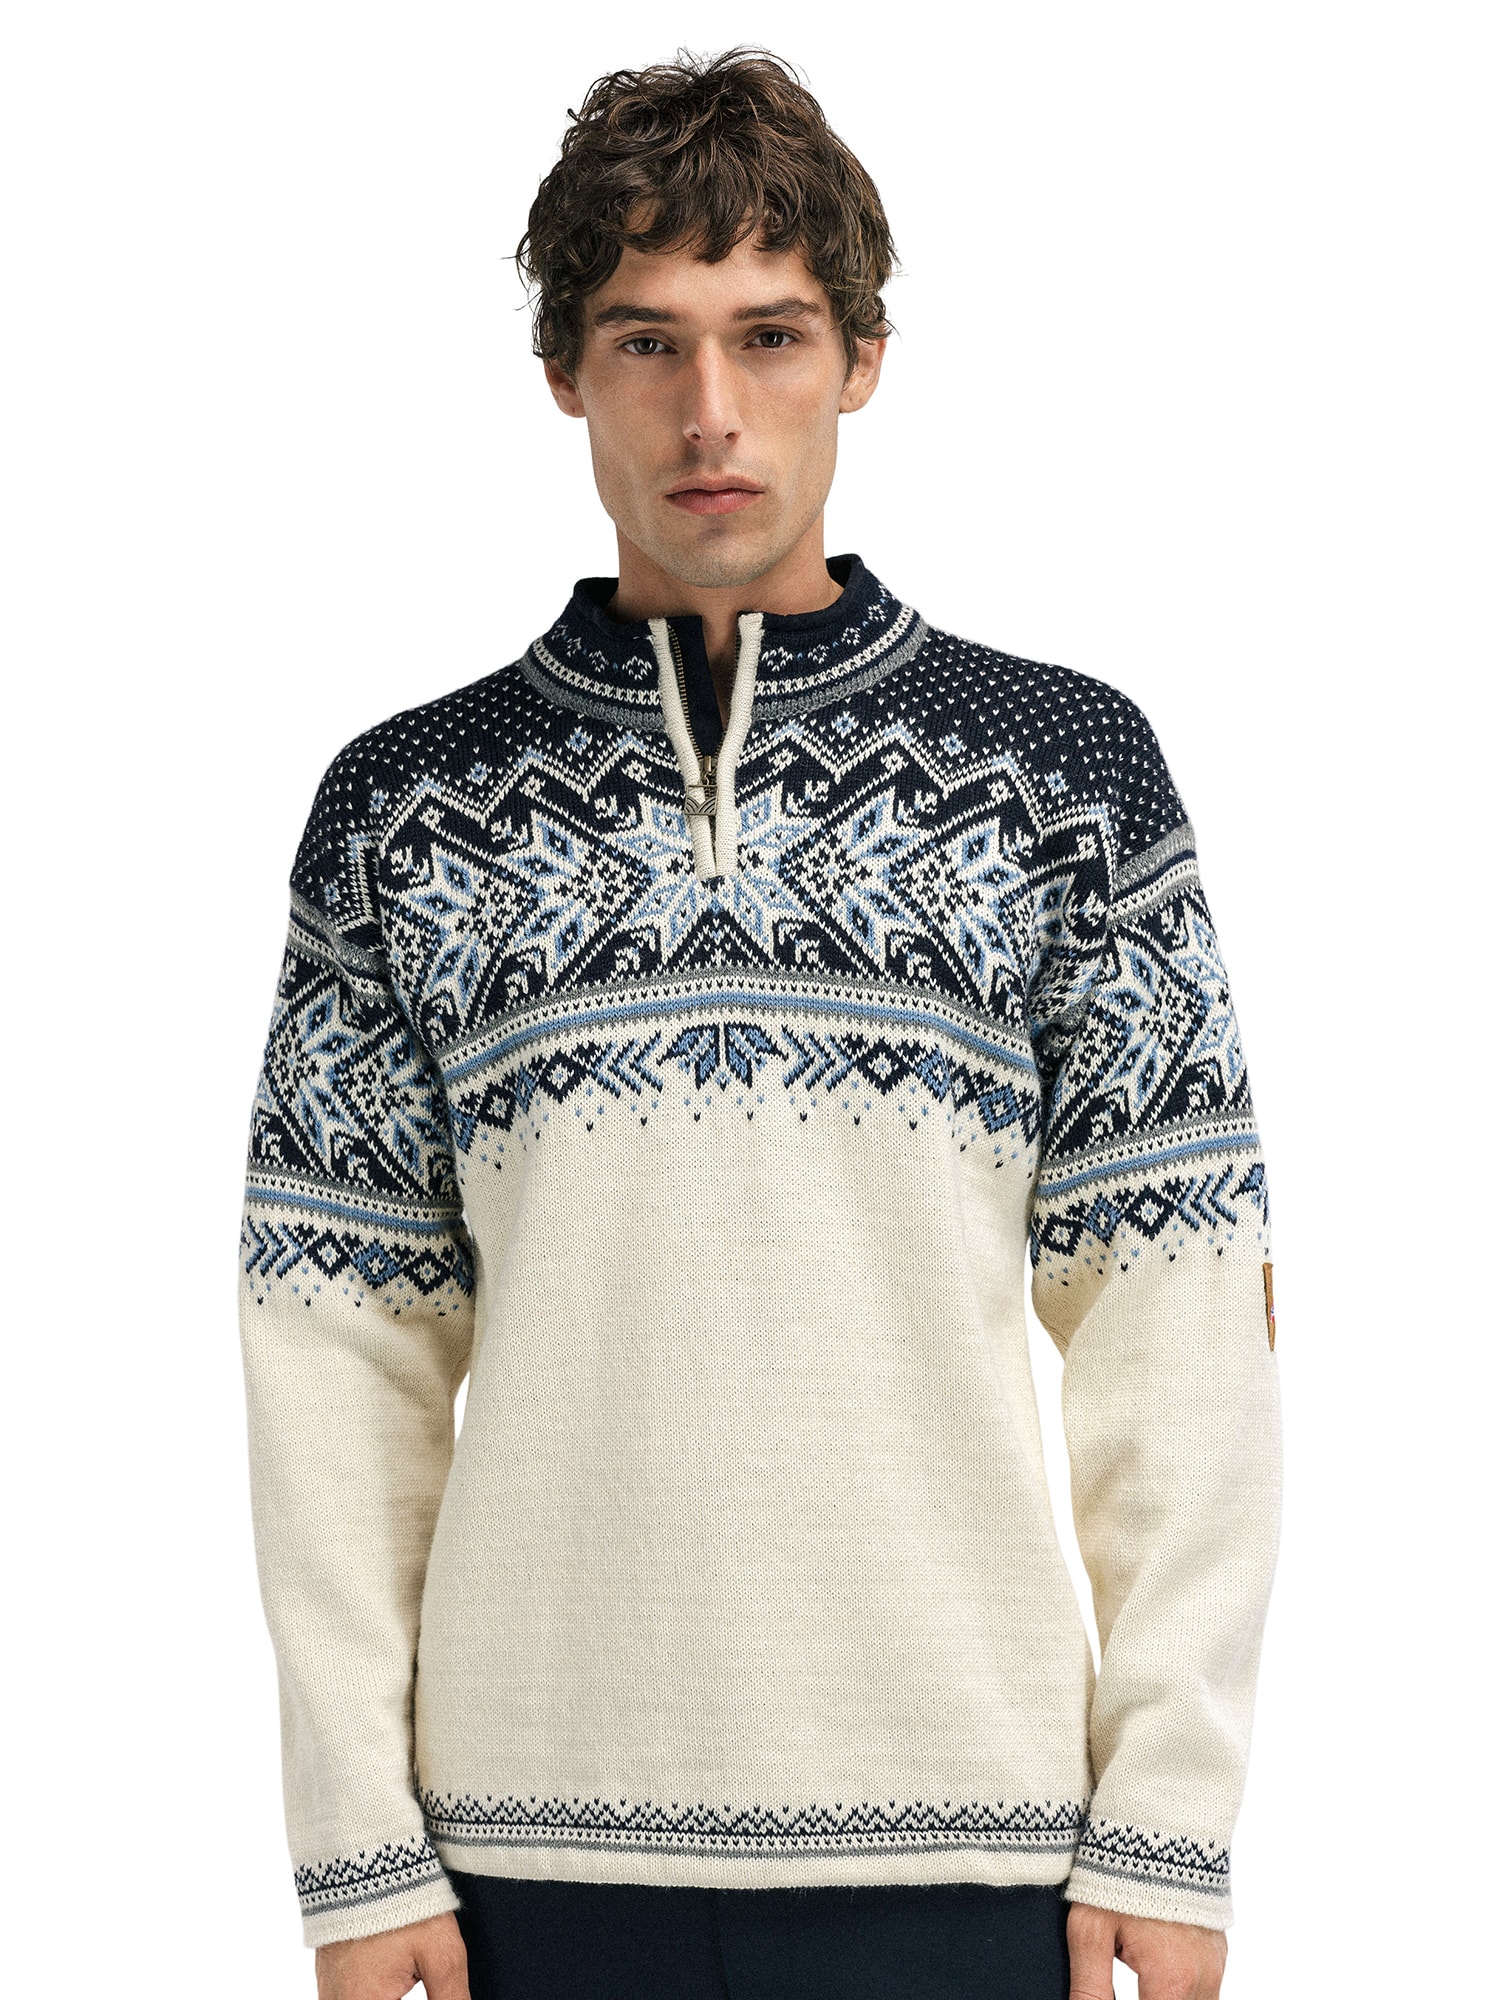 Vail Sweater - Men - Offwhite/Blue - Dale of Norway - Dale of Norway